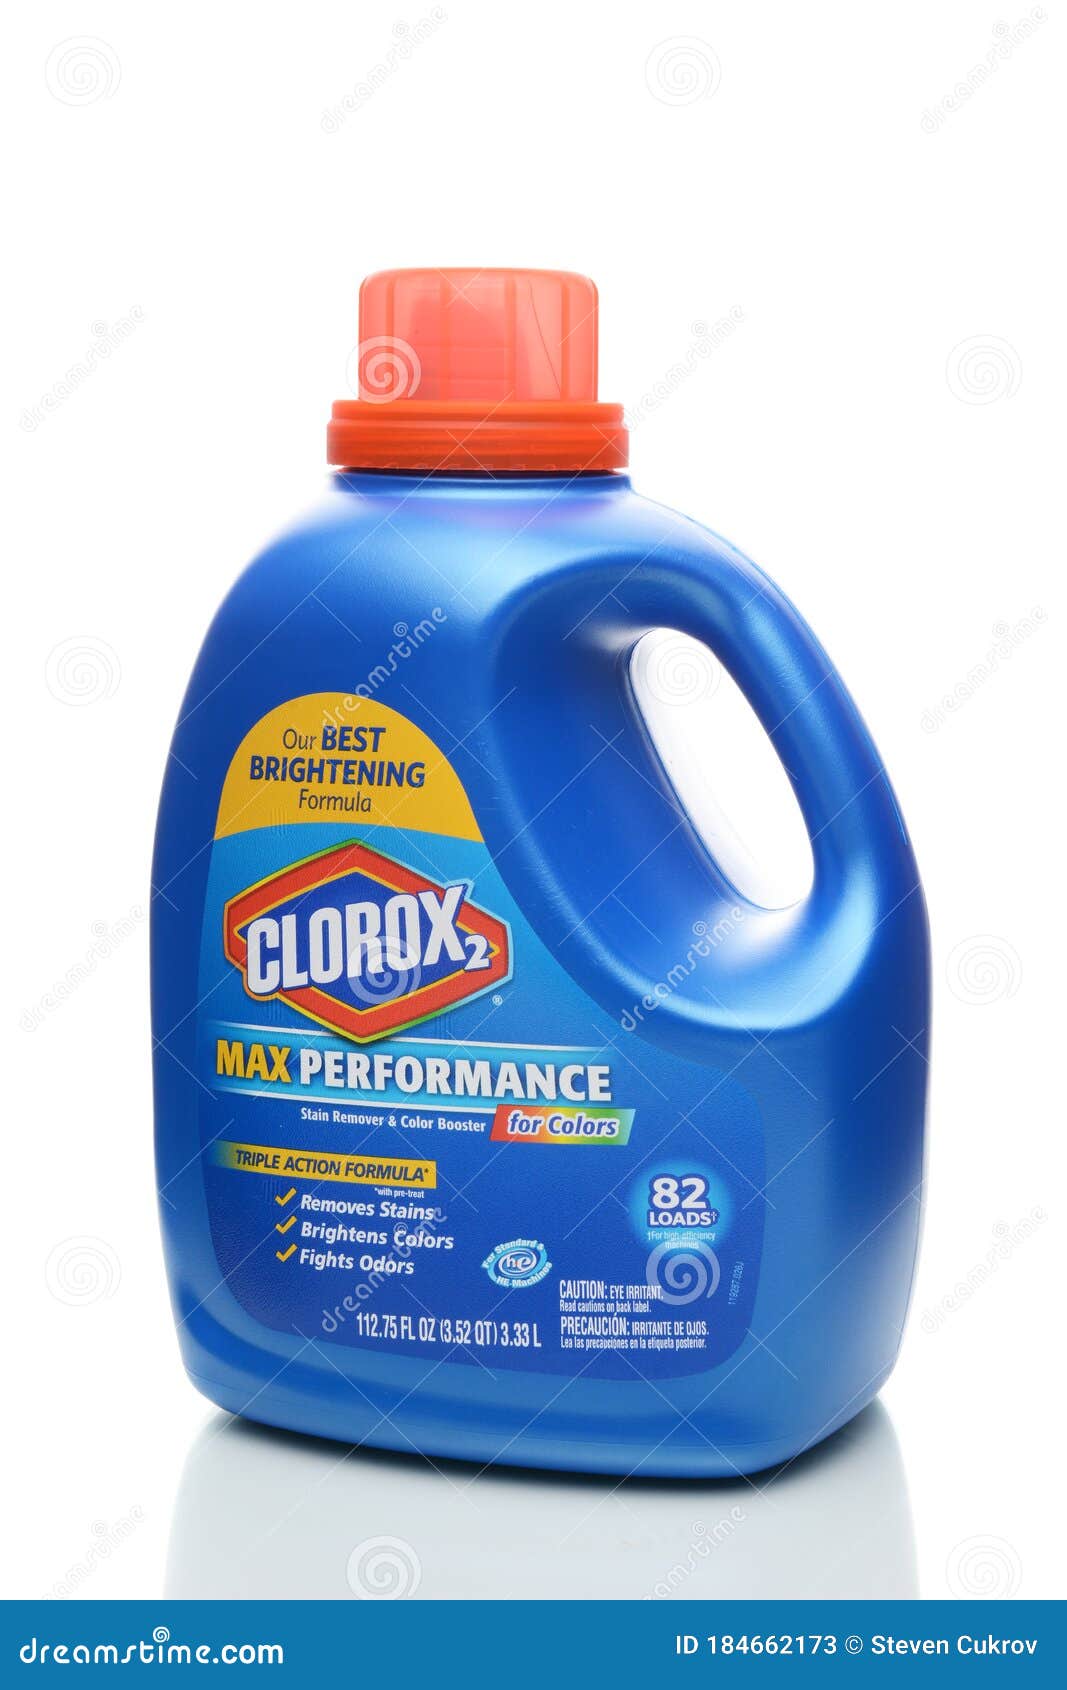 https://thumbs.dreamstime.com/z/clorox-stain-remover-color-booster-liquid-irvine-ca-january-product-helps-keep-clothes-looking-newer-longer-leaving-behind-184662173.jpg